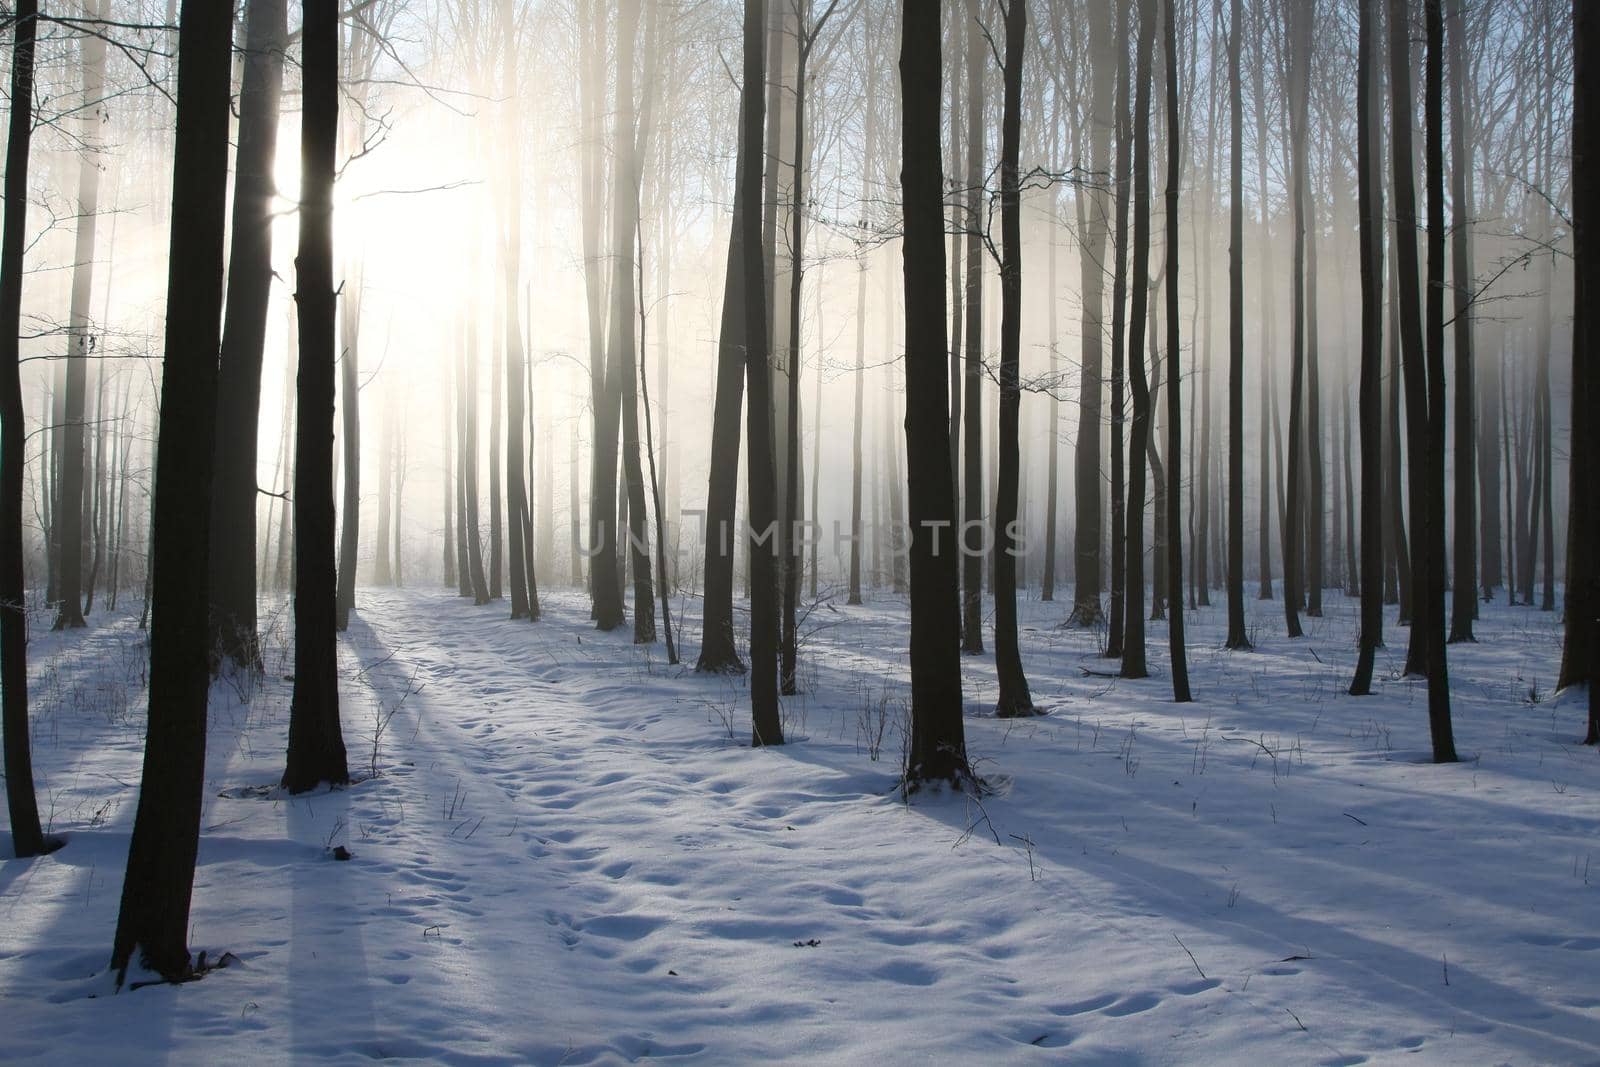 Winter forest at sunrise by nature78